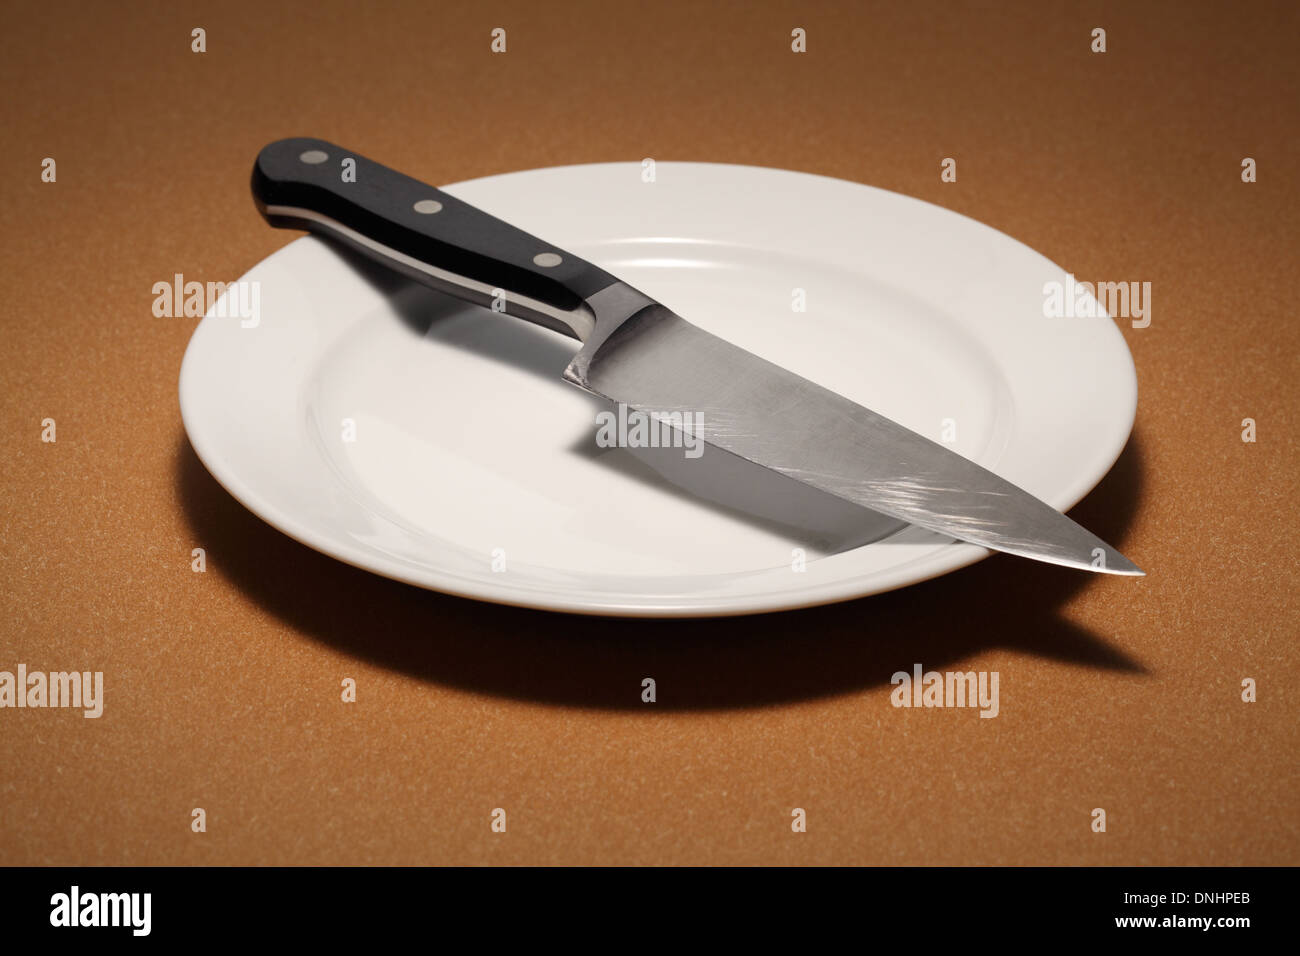 A large kitchen chef's knife on a empty white dinning plate. Stock Photo